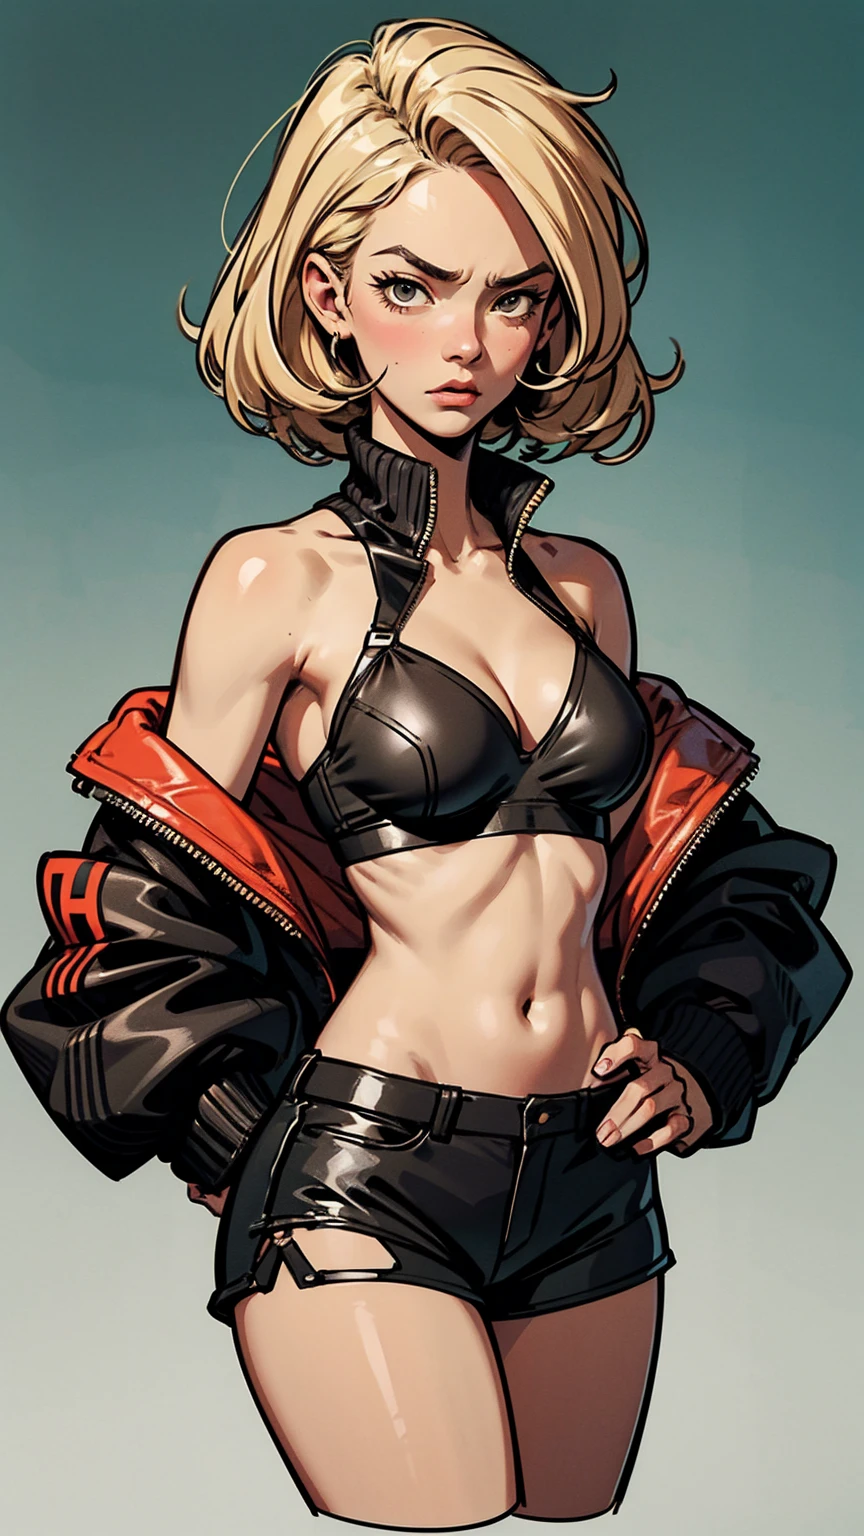 Girl, fit athletic body, nice breasts, annoyed expression, messy disheveled blonde hair, cropped race jacket, tube top bra, leather short shorts, 